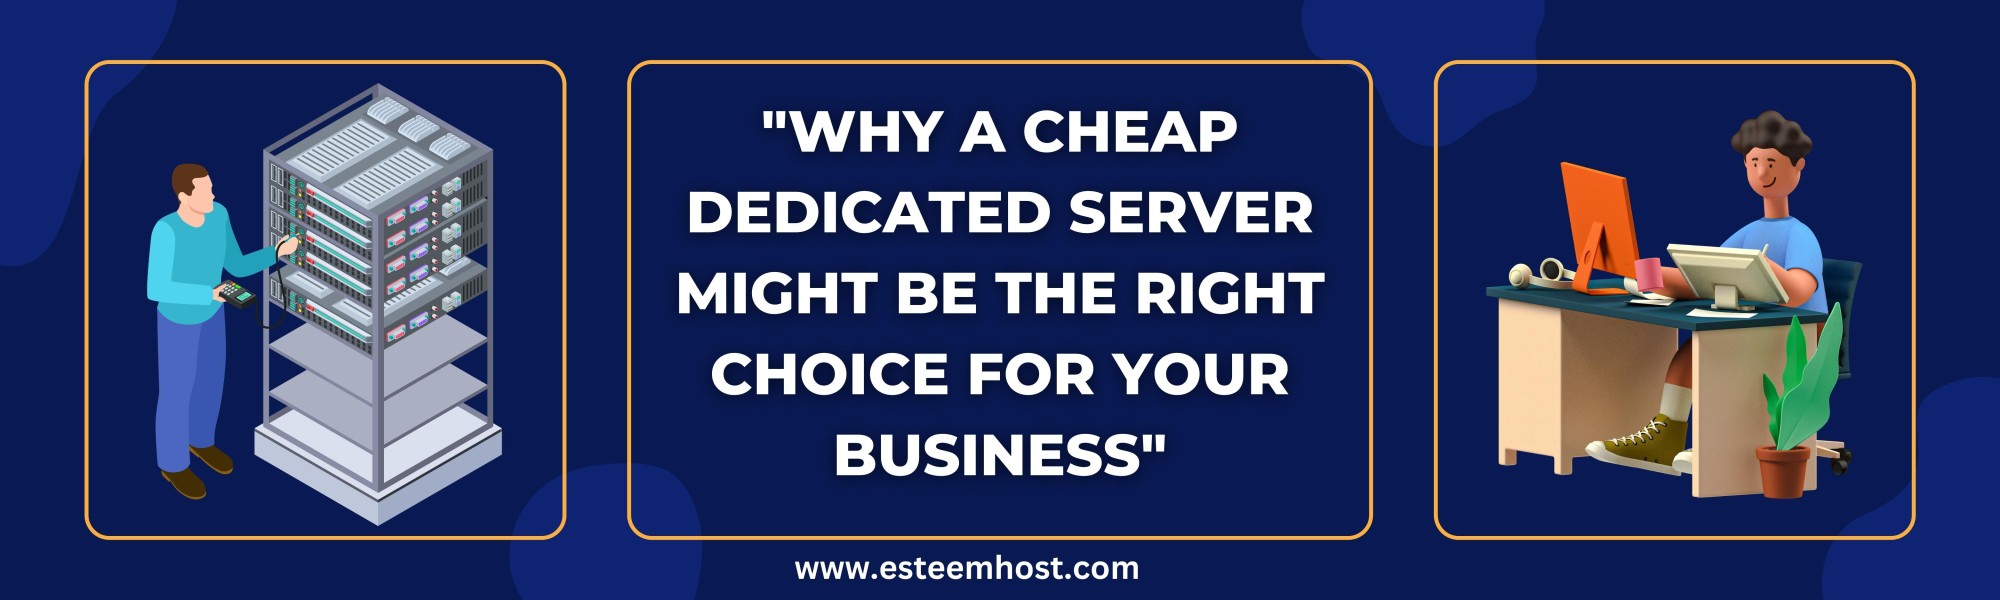 Spille computerspil Fortov Skynd dig Why a Cheap Dedicated Server Might Be the Right Choice for Your Business